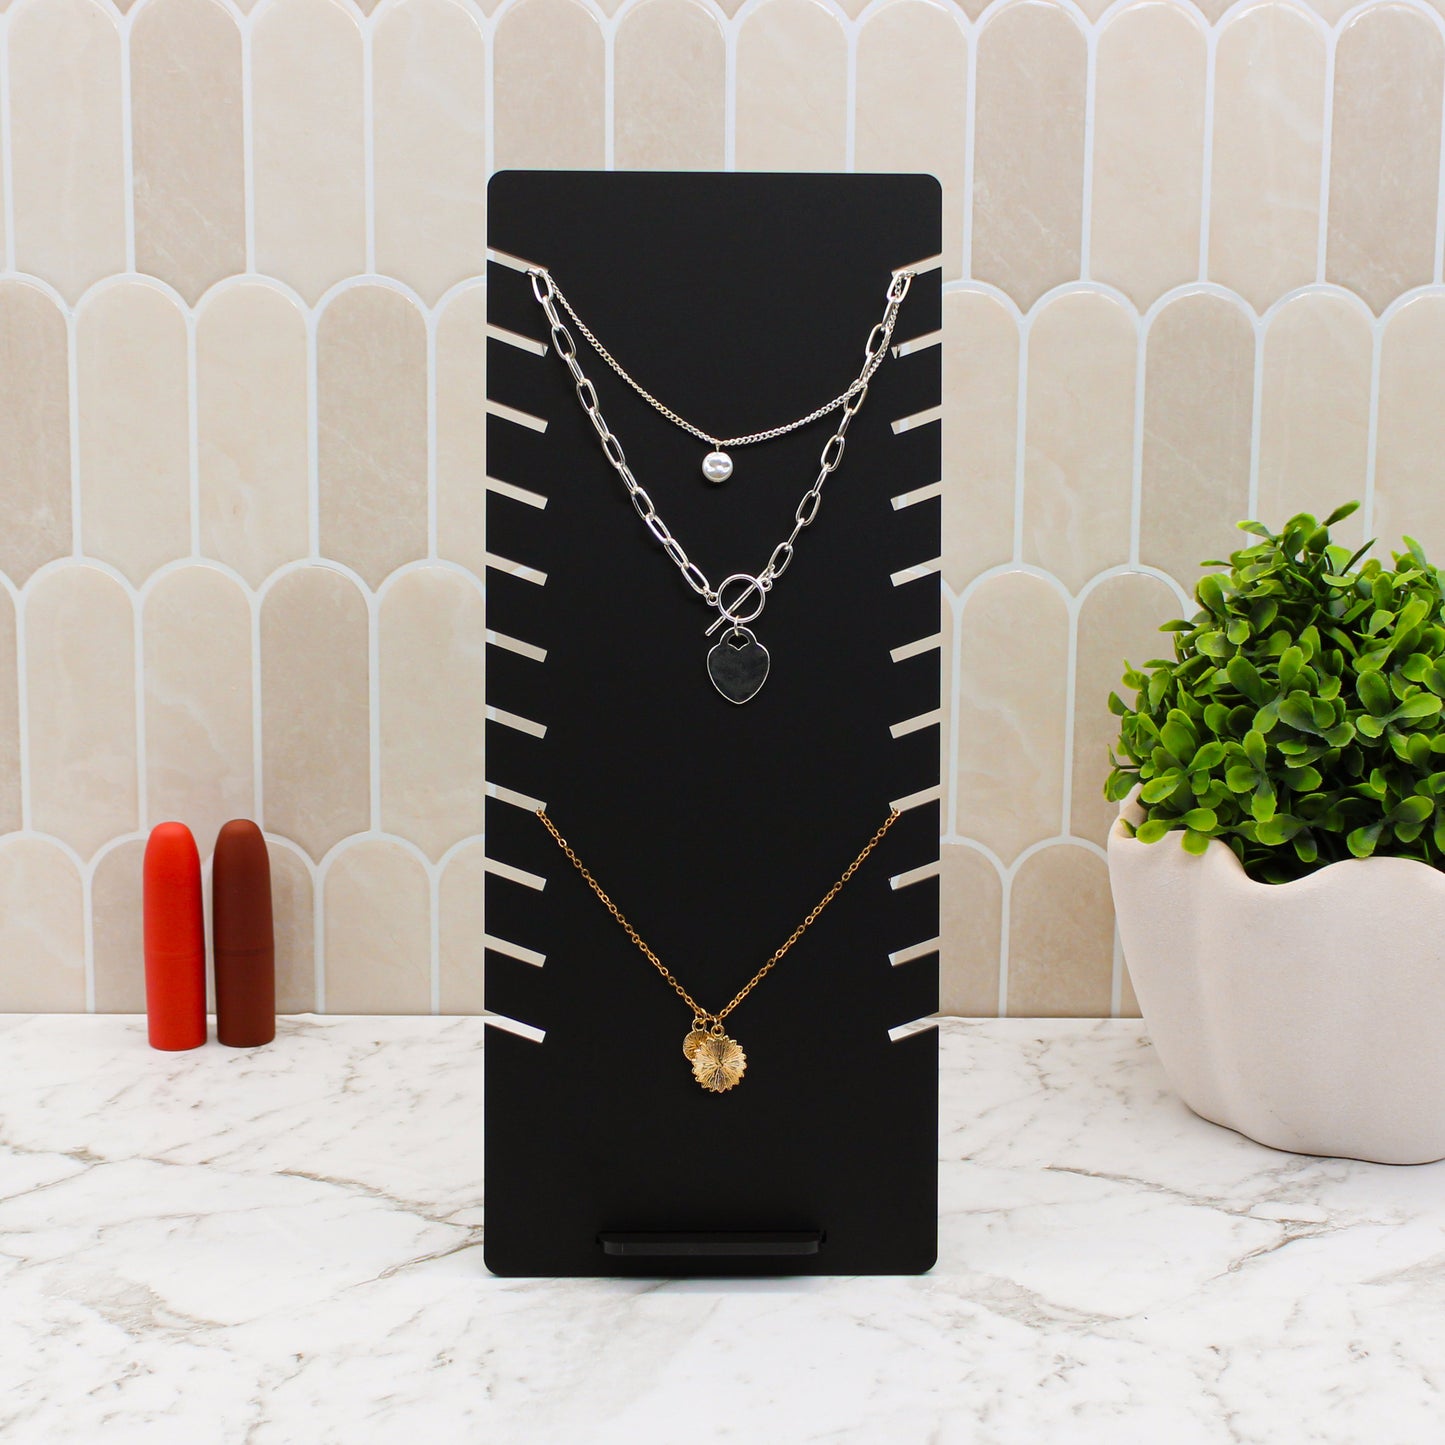 Elegant Tall Necklace Holder - Jewellery Stand Home Decor